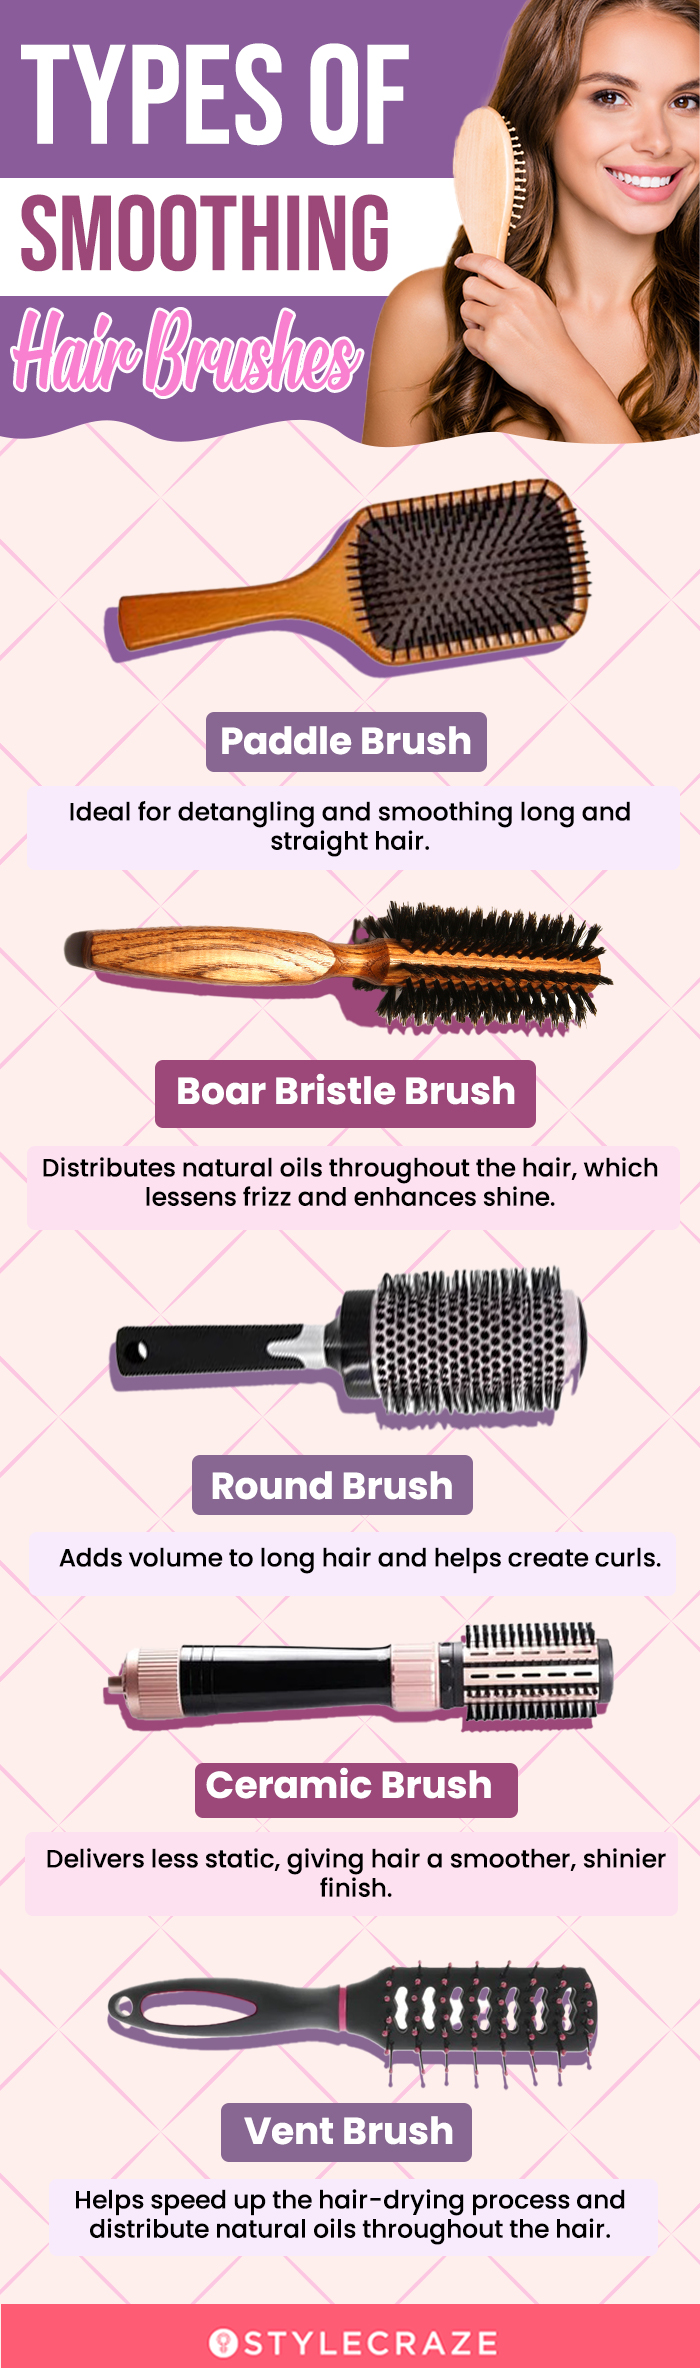 Types Of Smoothing Hairbrushes (infographic)